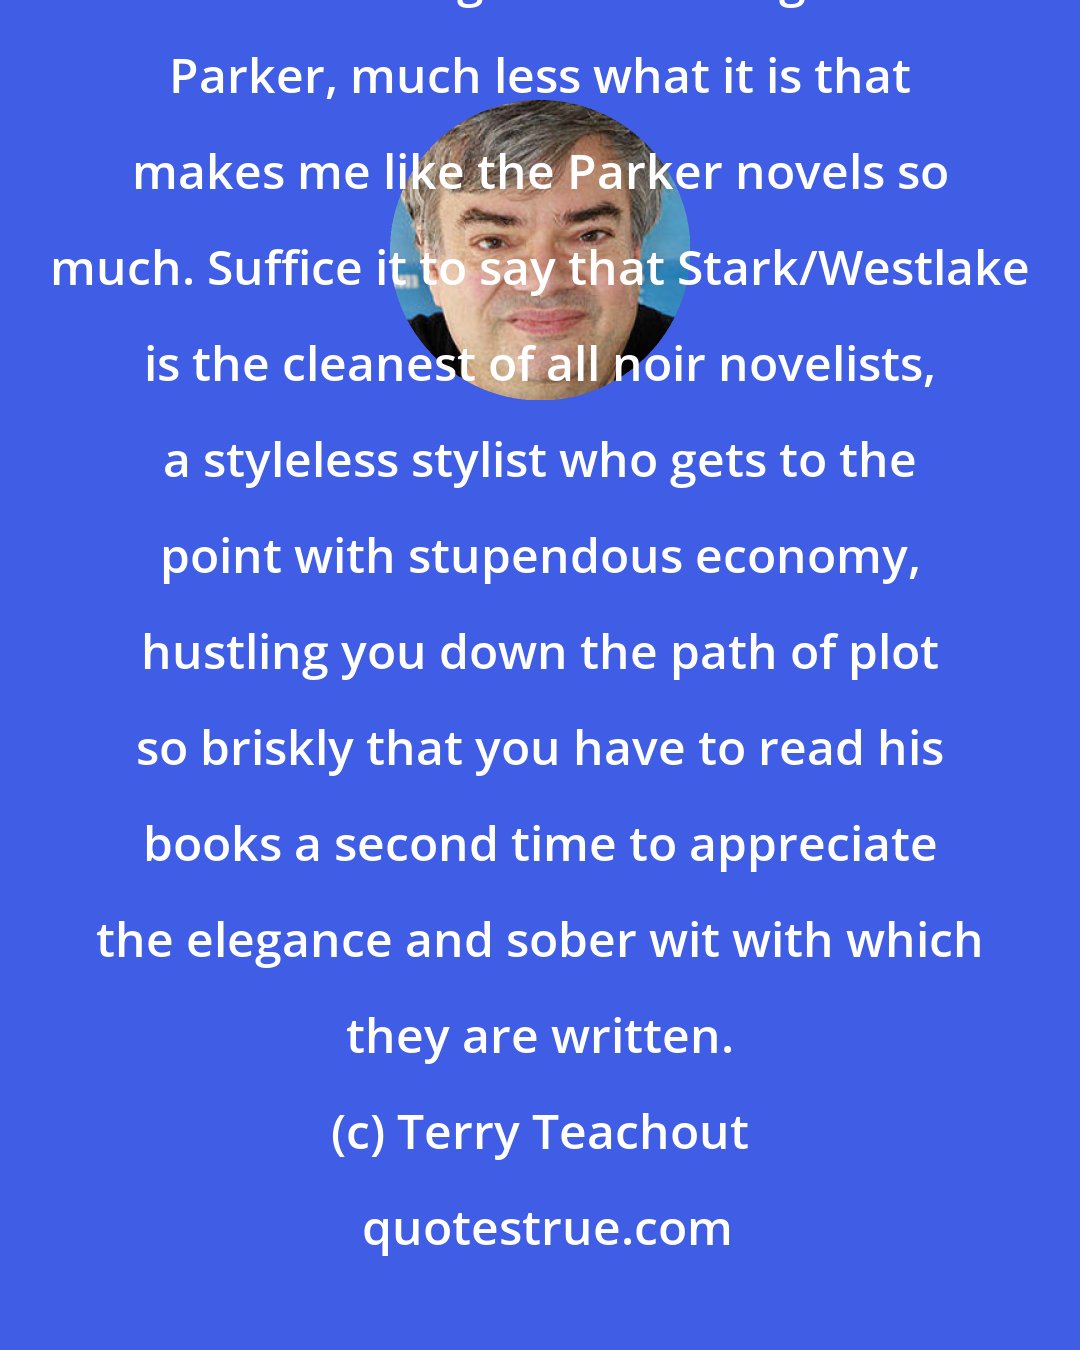 Terry Teachout: I wouldn't care to speculate about what it is in Westlake's psyche that makes him so good at writing about Parker, much less what it is that makes me like the Parker novels so much. Suffice it to say that Stark/Westlake is the cleanest of all noir novelists, a styleless stylist who gets to the point with stupendous economy, hustling you down the path of plot so briskly that you have to read his books a second time to appreciate the elegance and sober wit with which they are written.